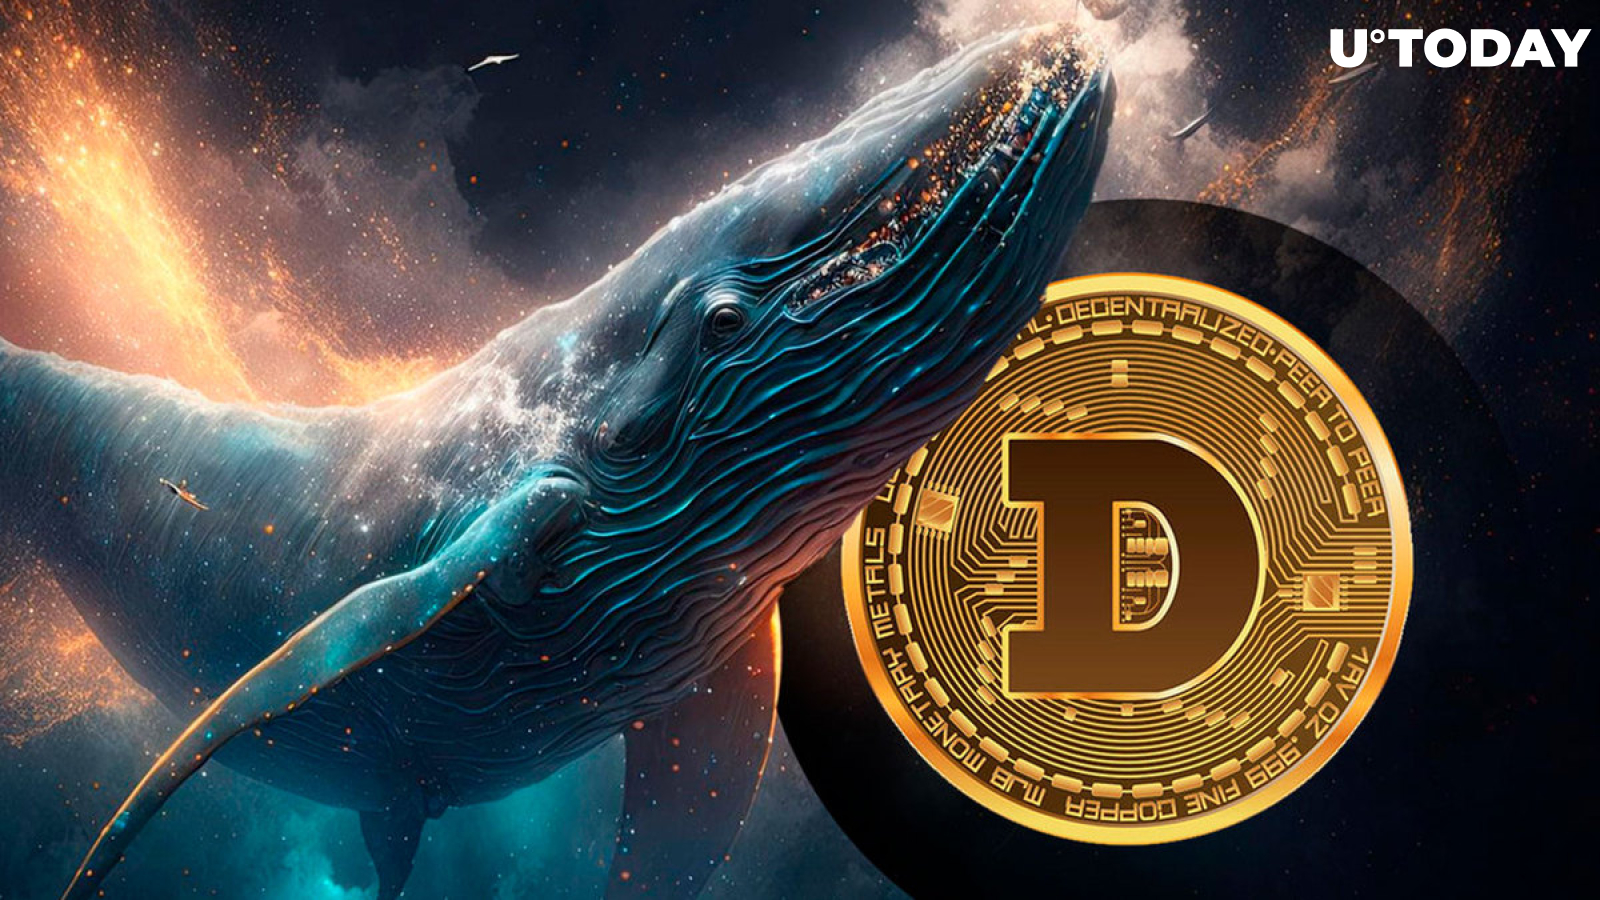 700 Million Dogecoin (DOGE) in 72 Hours, Whales Finally Awake